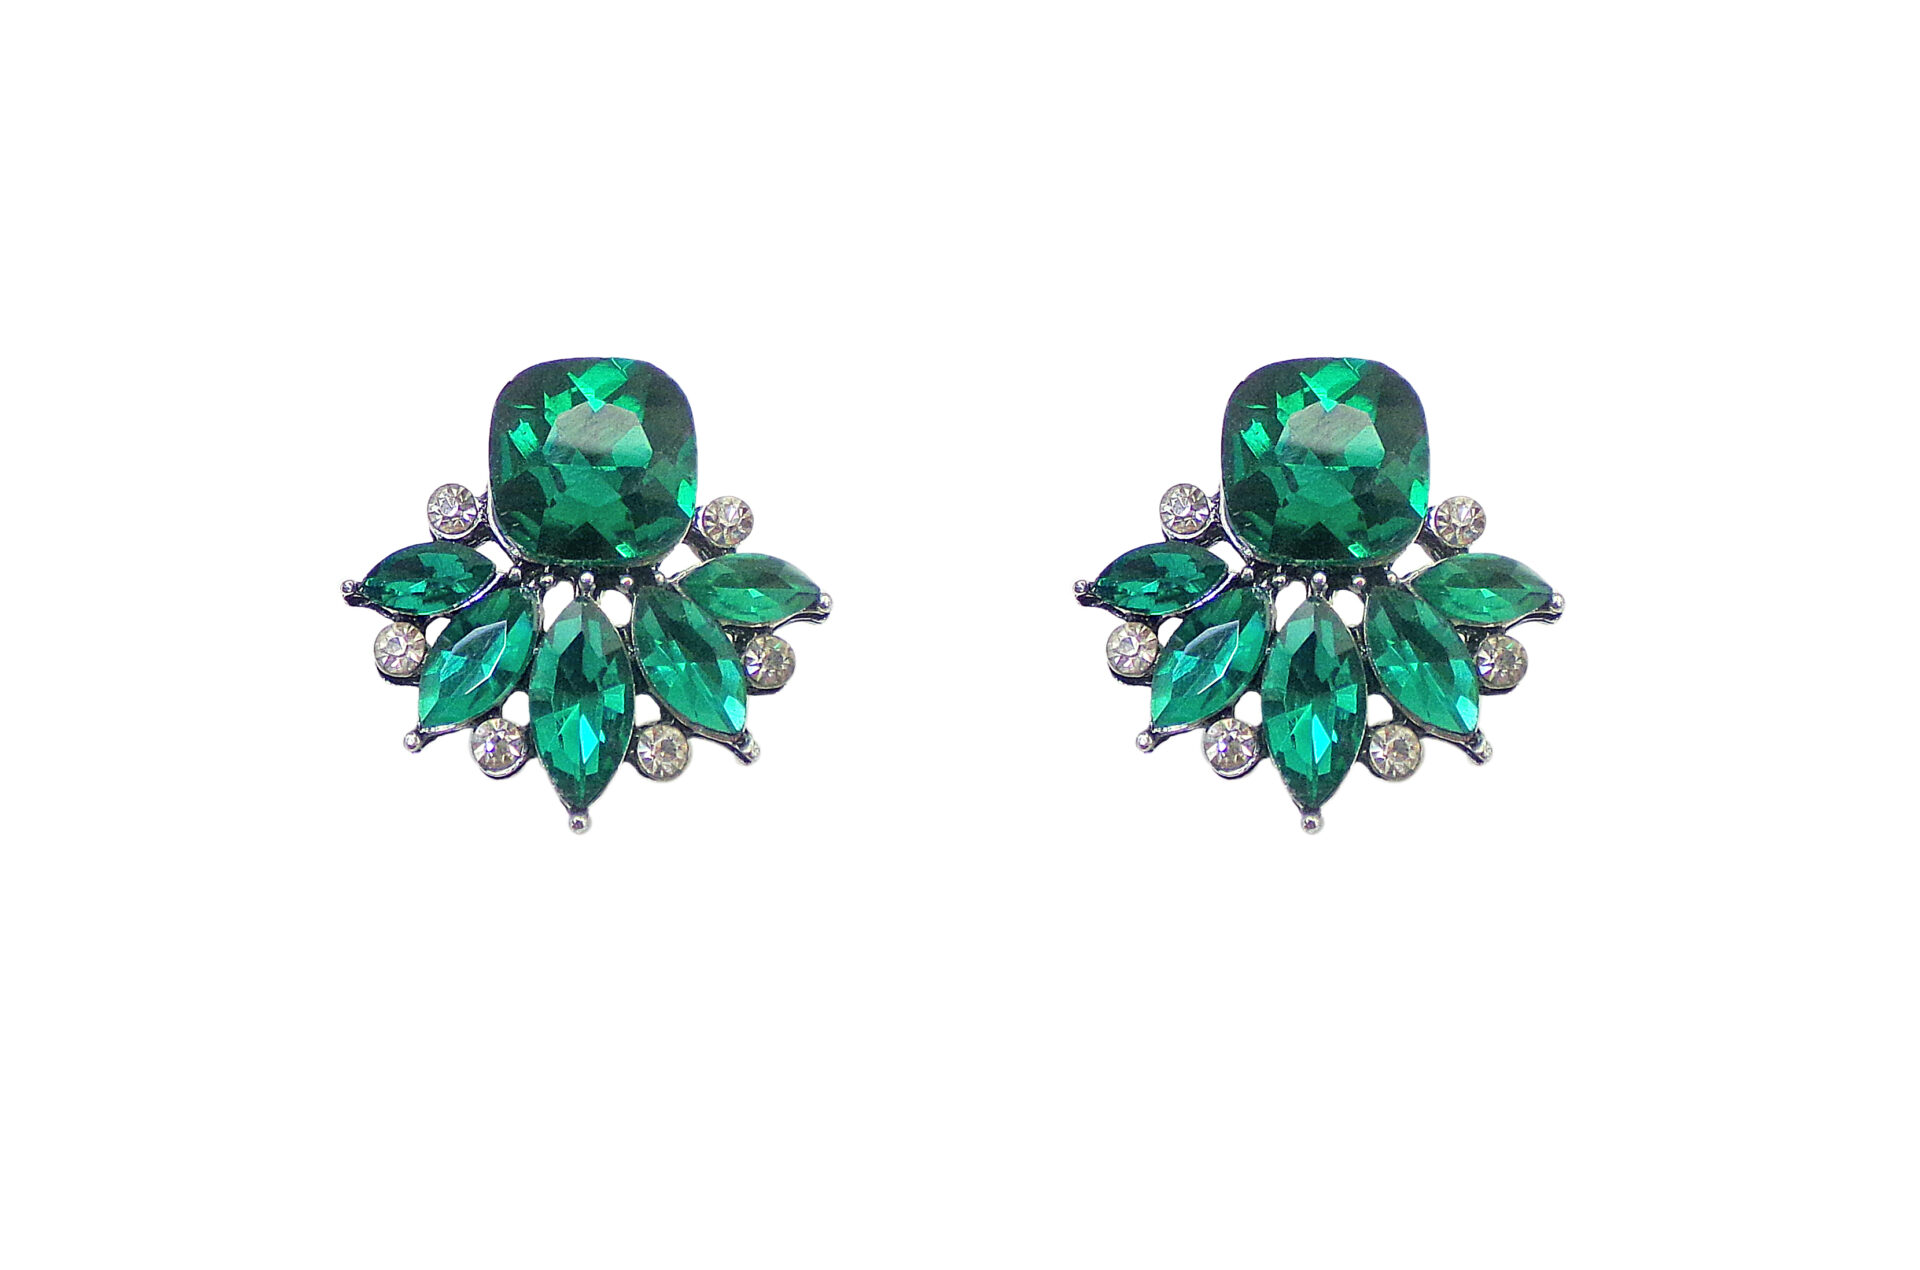 Green Color Crystal Studded Earrings Pair